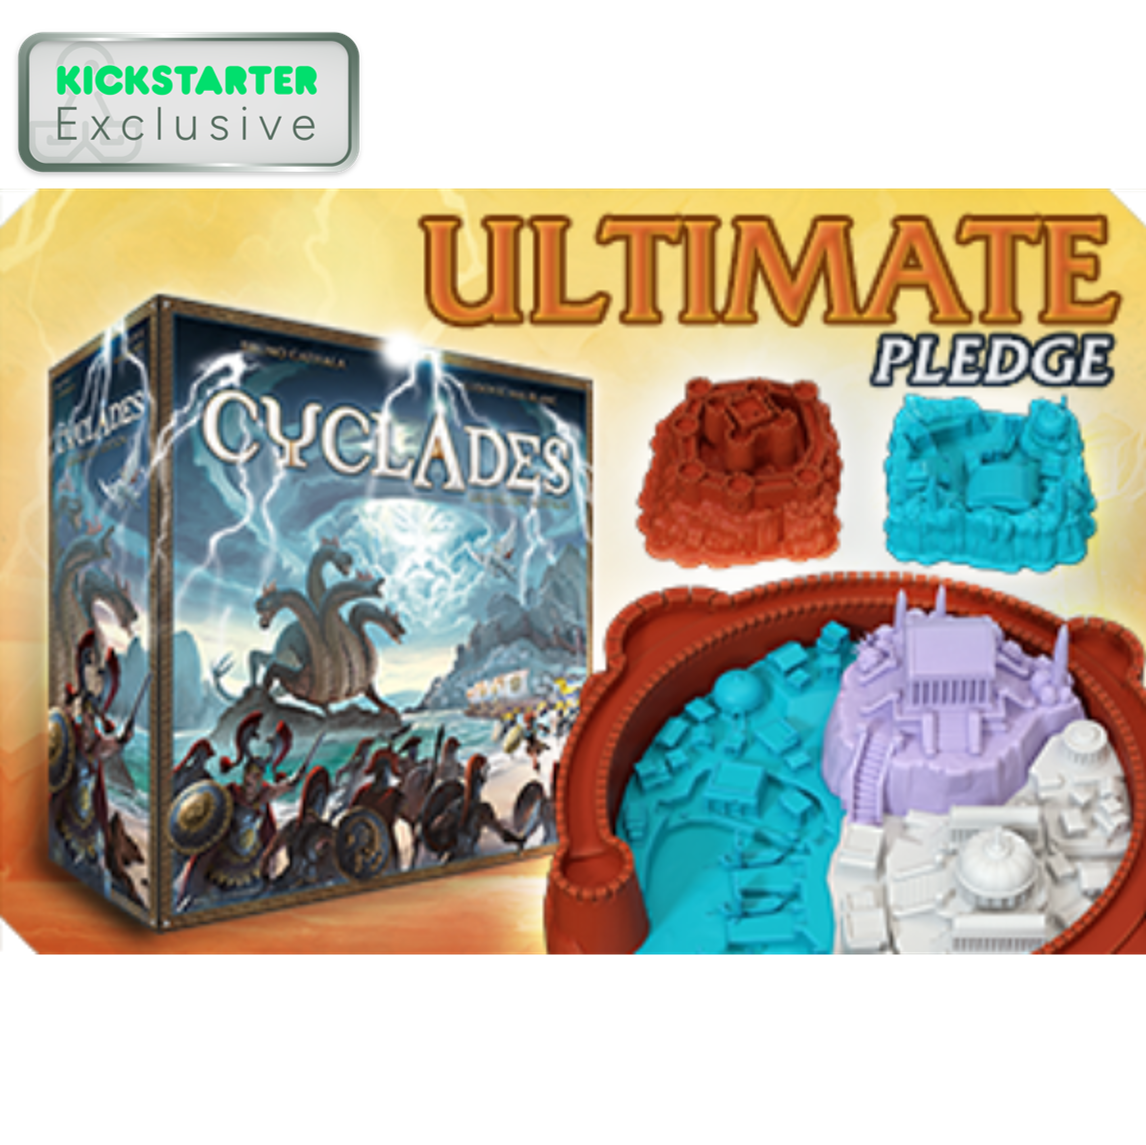 Kickstarter Exclusive Cyclades Legendary Edition Verified All-In Pledge